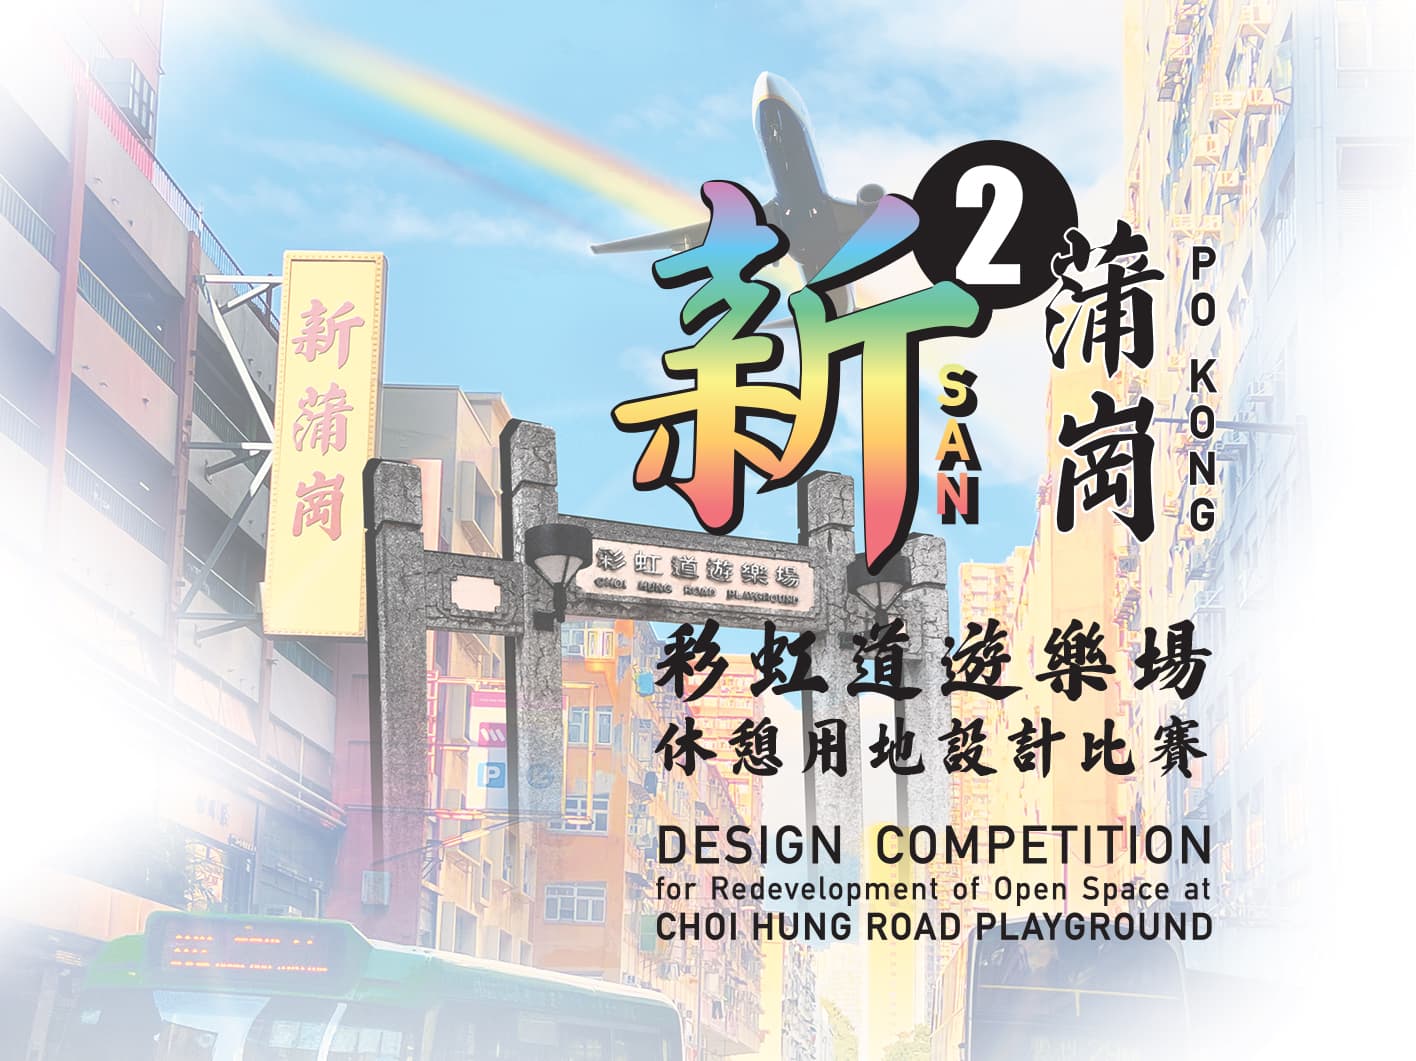 Design Competition for Redevelopment of Open Space at Choi Hung Road Playground concludes